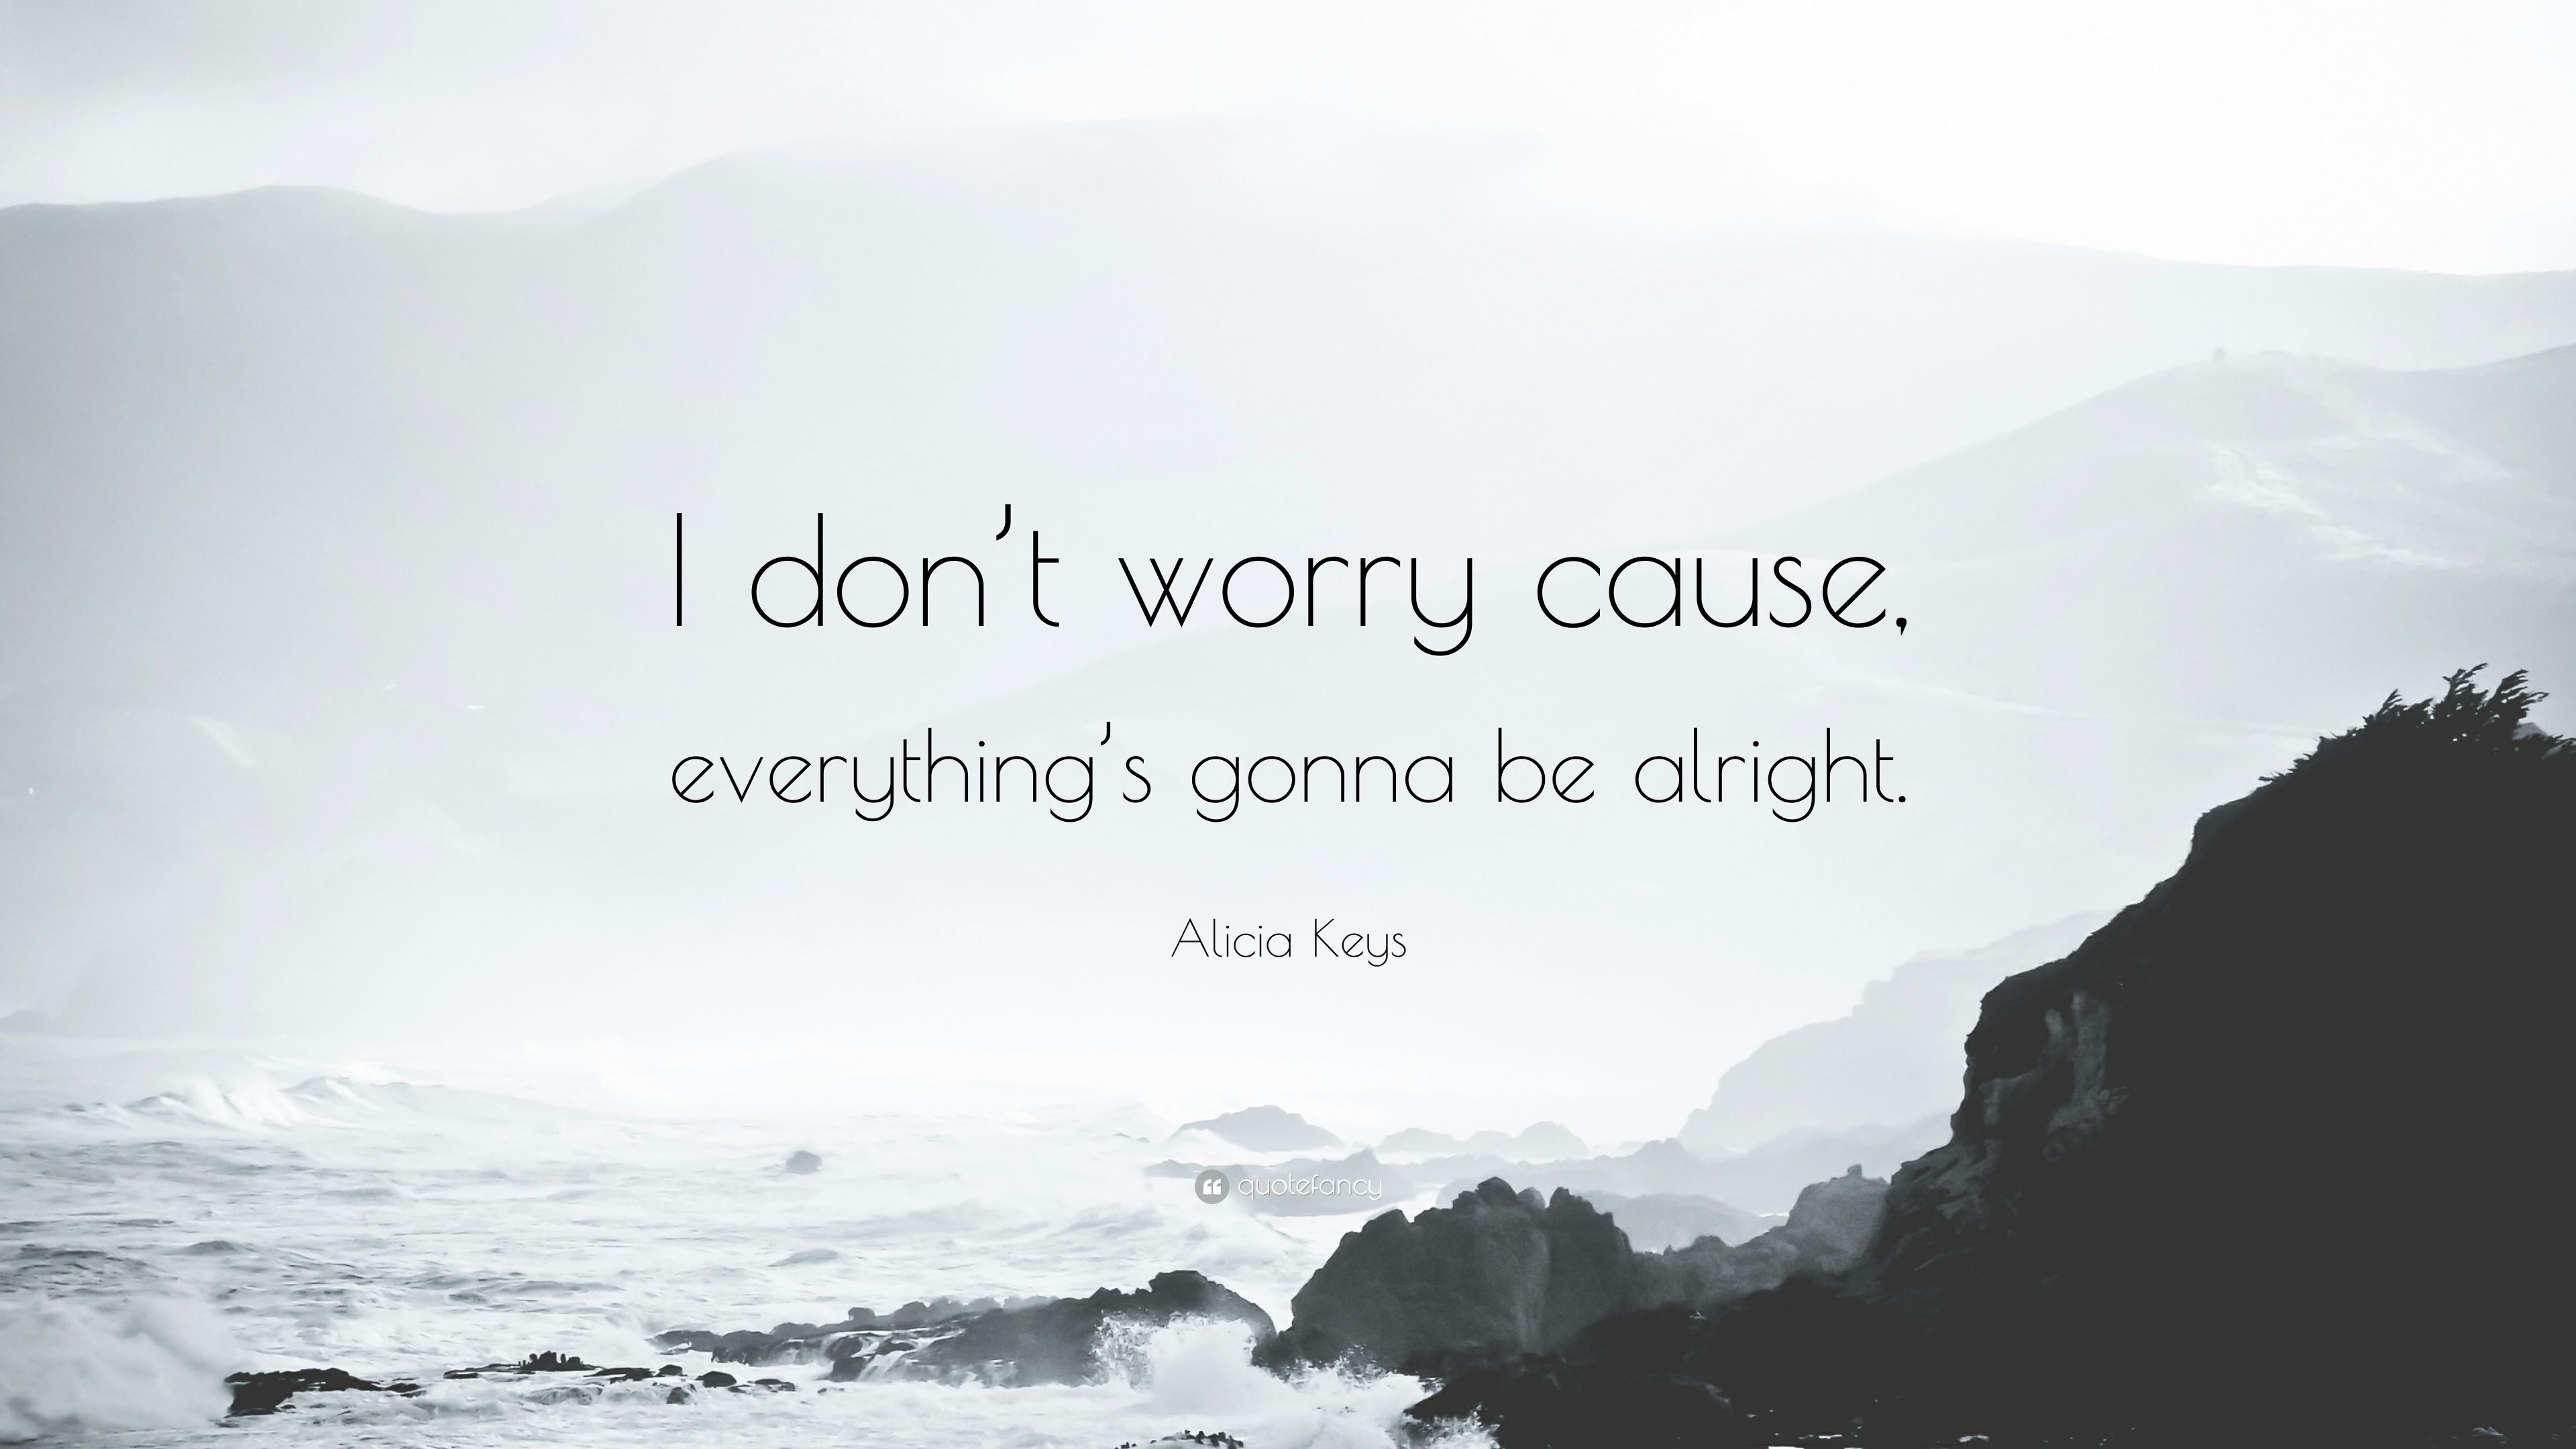 Alicia Keys Quote: “I don't worry cause, everything's gonna be alright.” (12 wallpaper)